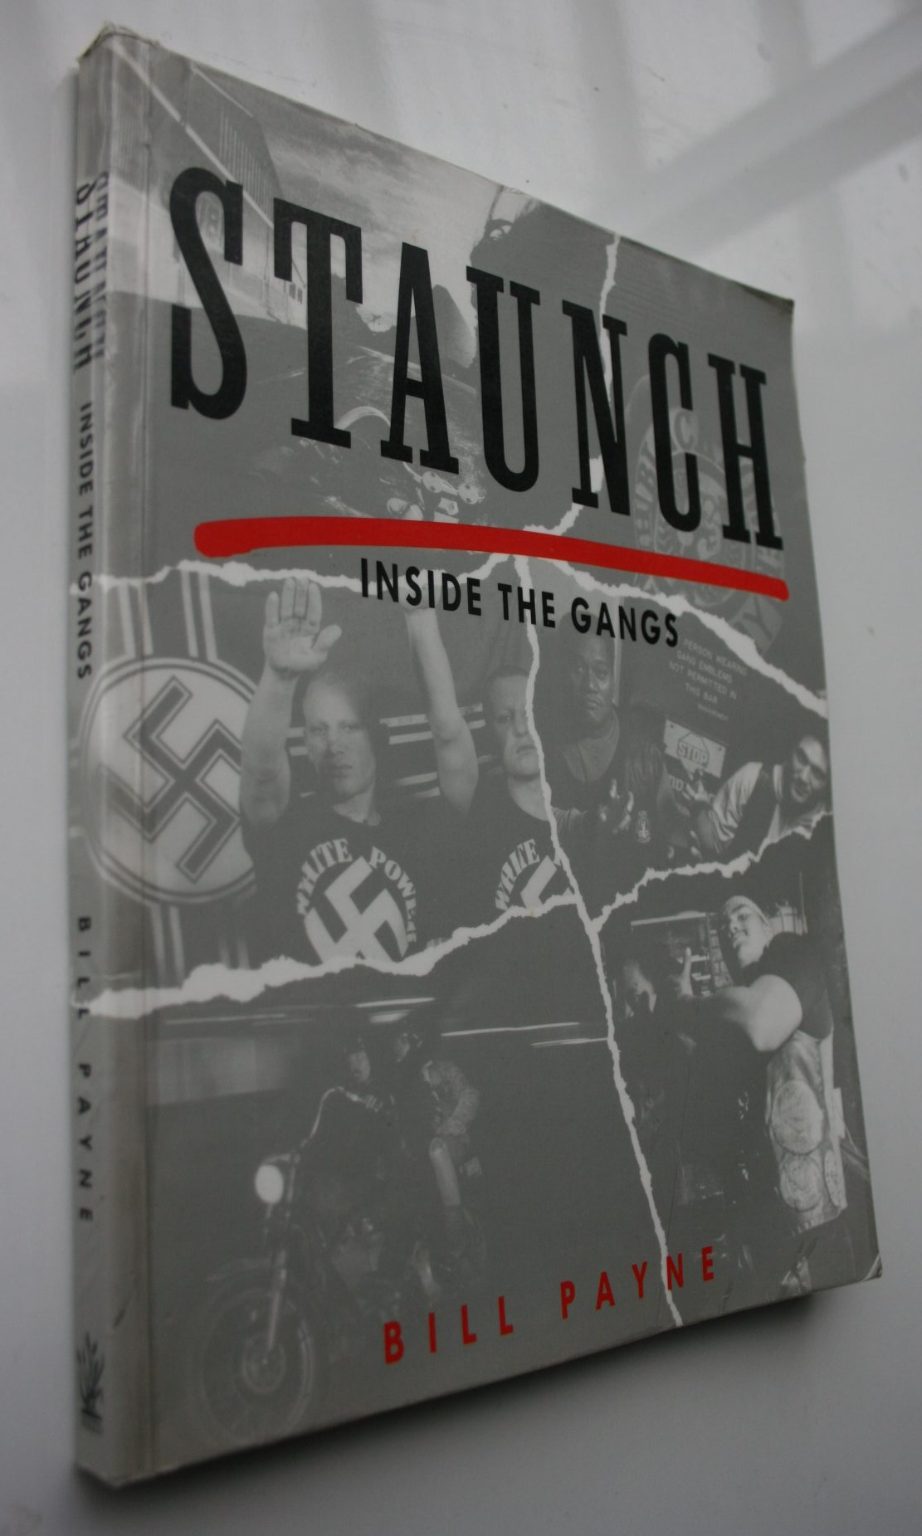 Staunch. Inside New Zealand's Gangs by Bill Payne. SIGNED BY AUTHOR. VERY SCARCE.